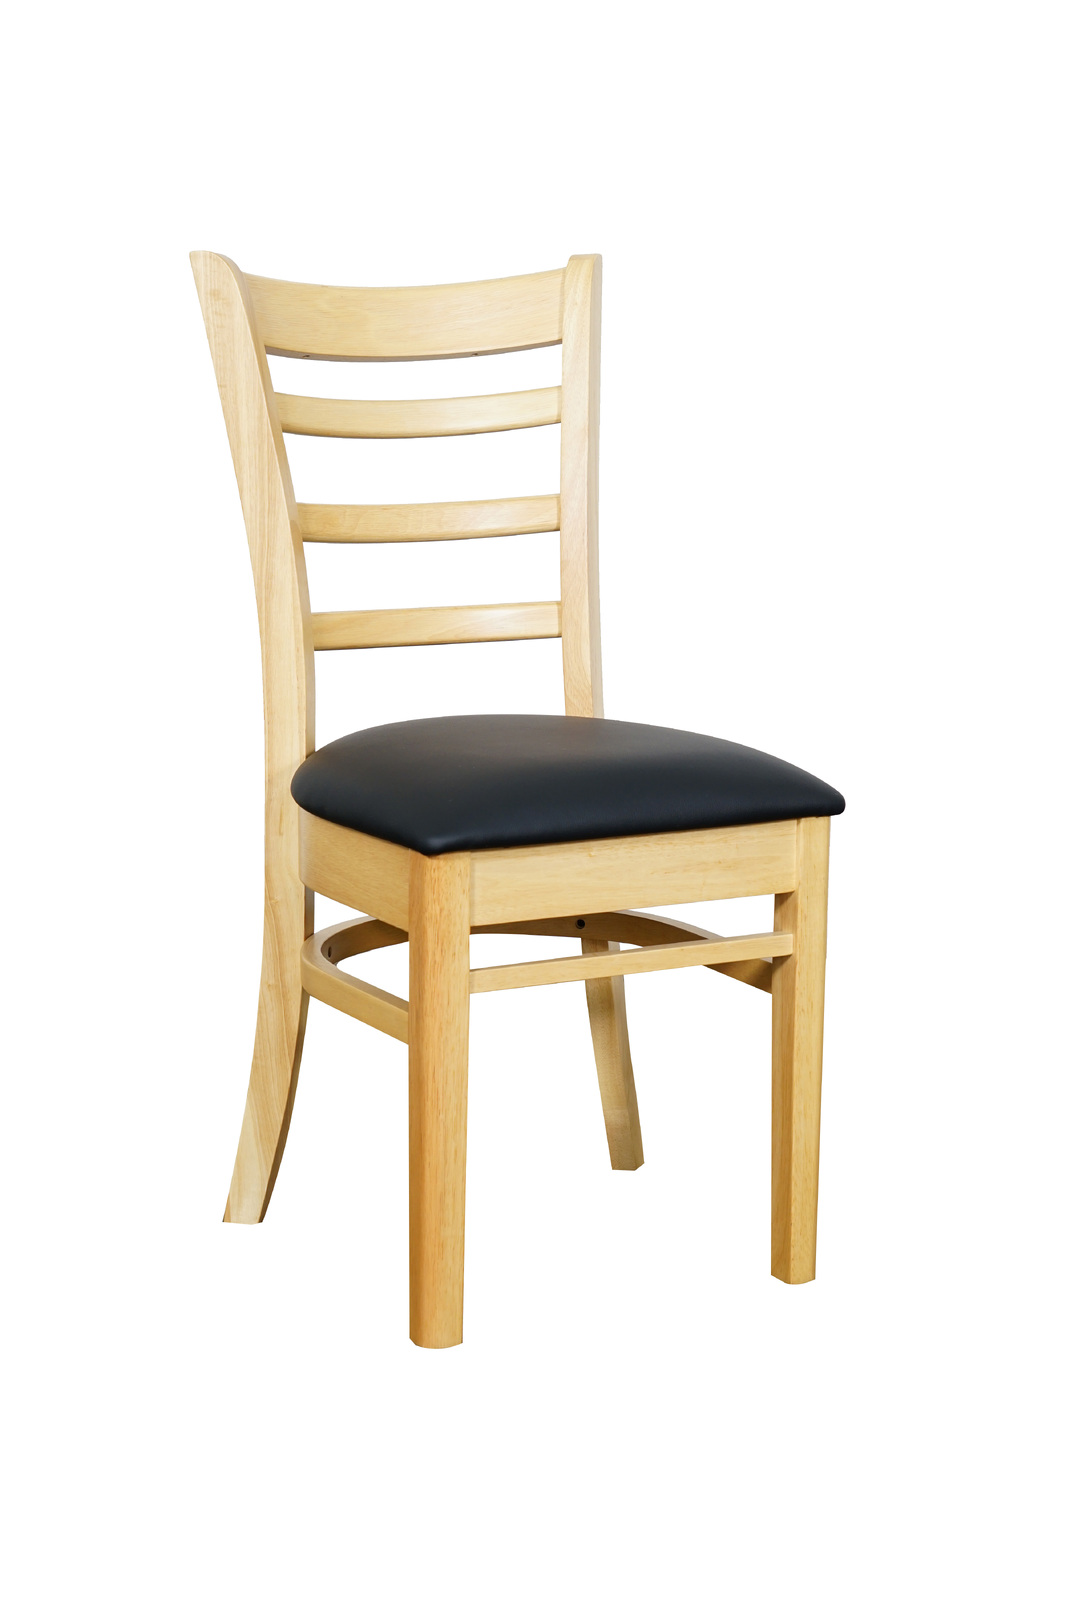 Mustang Timber Dining Chair Black PU Seat and Natural Back and Frame